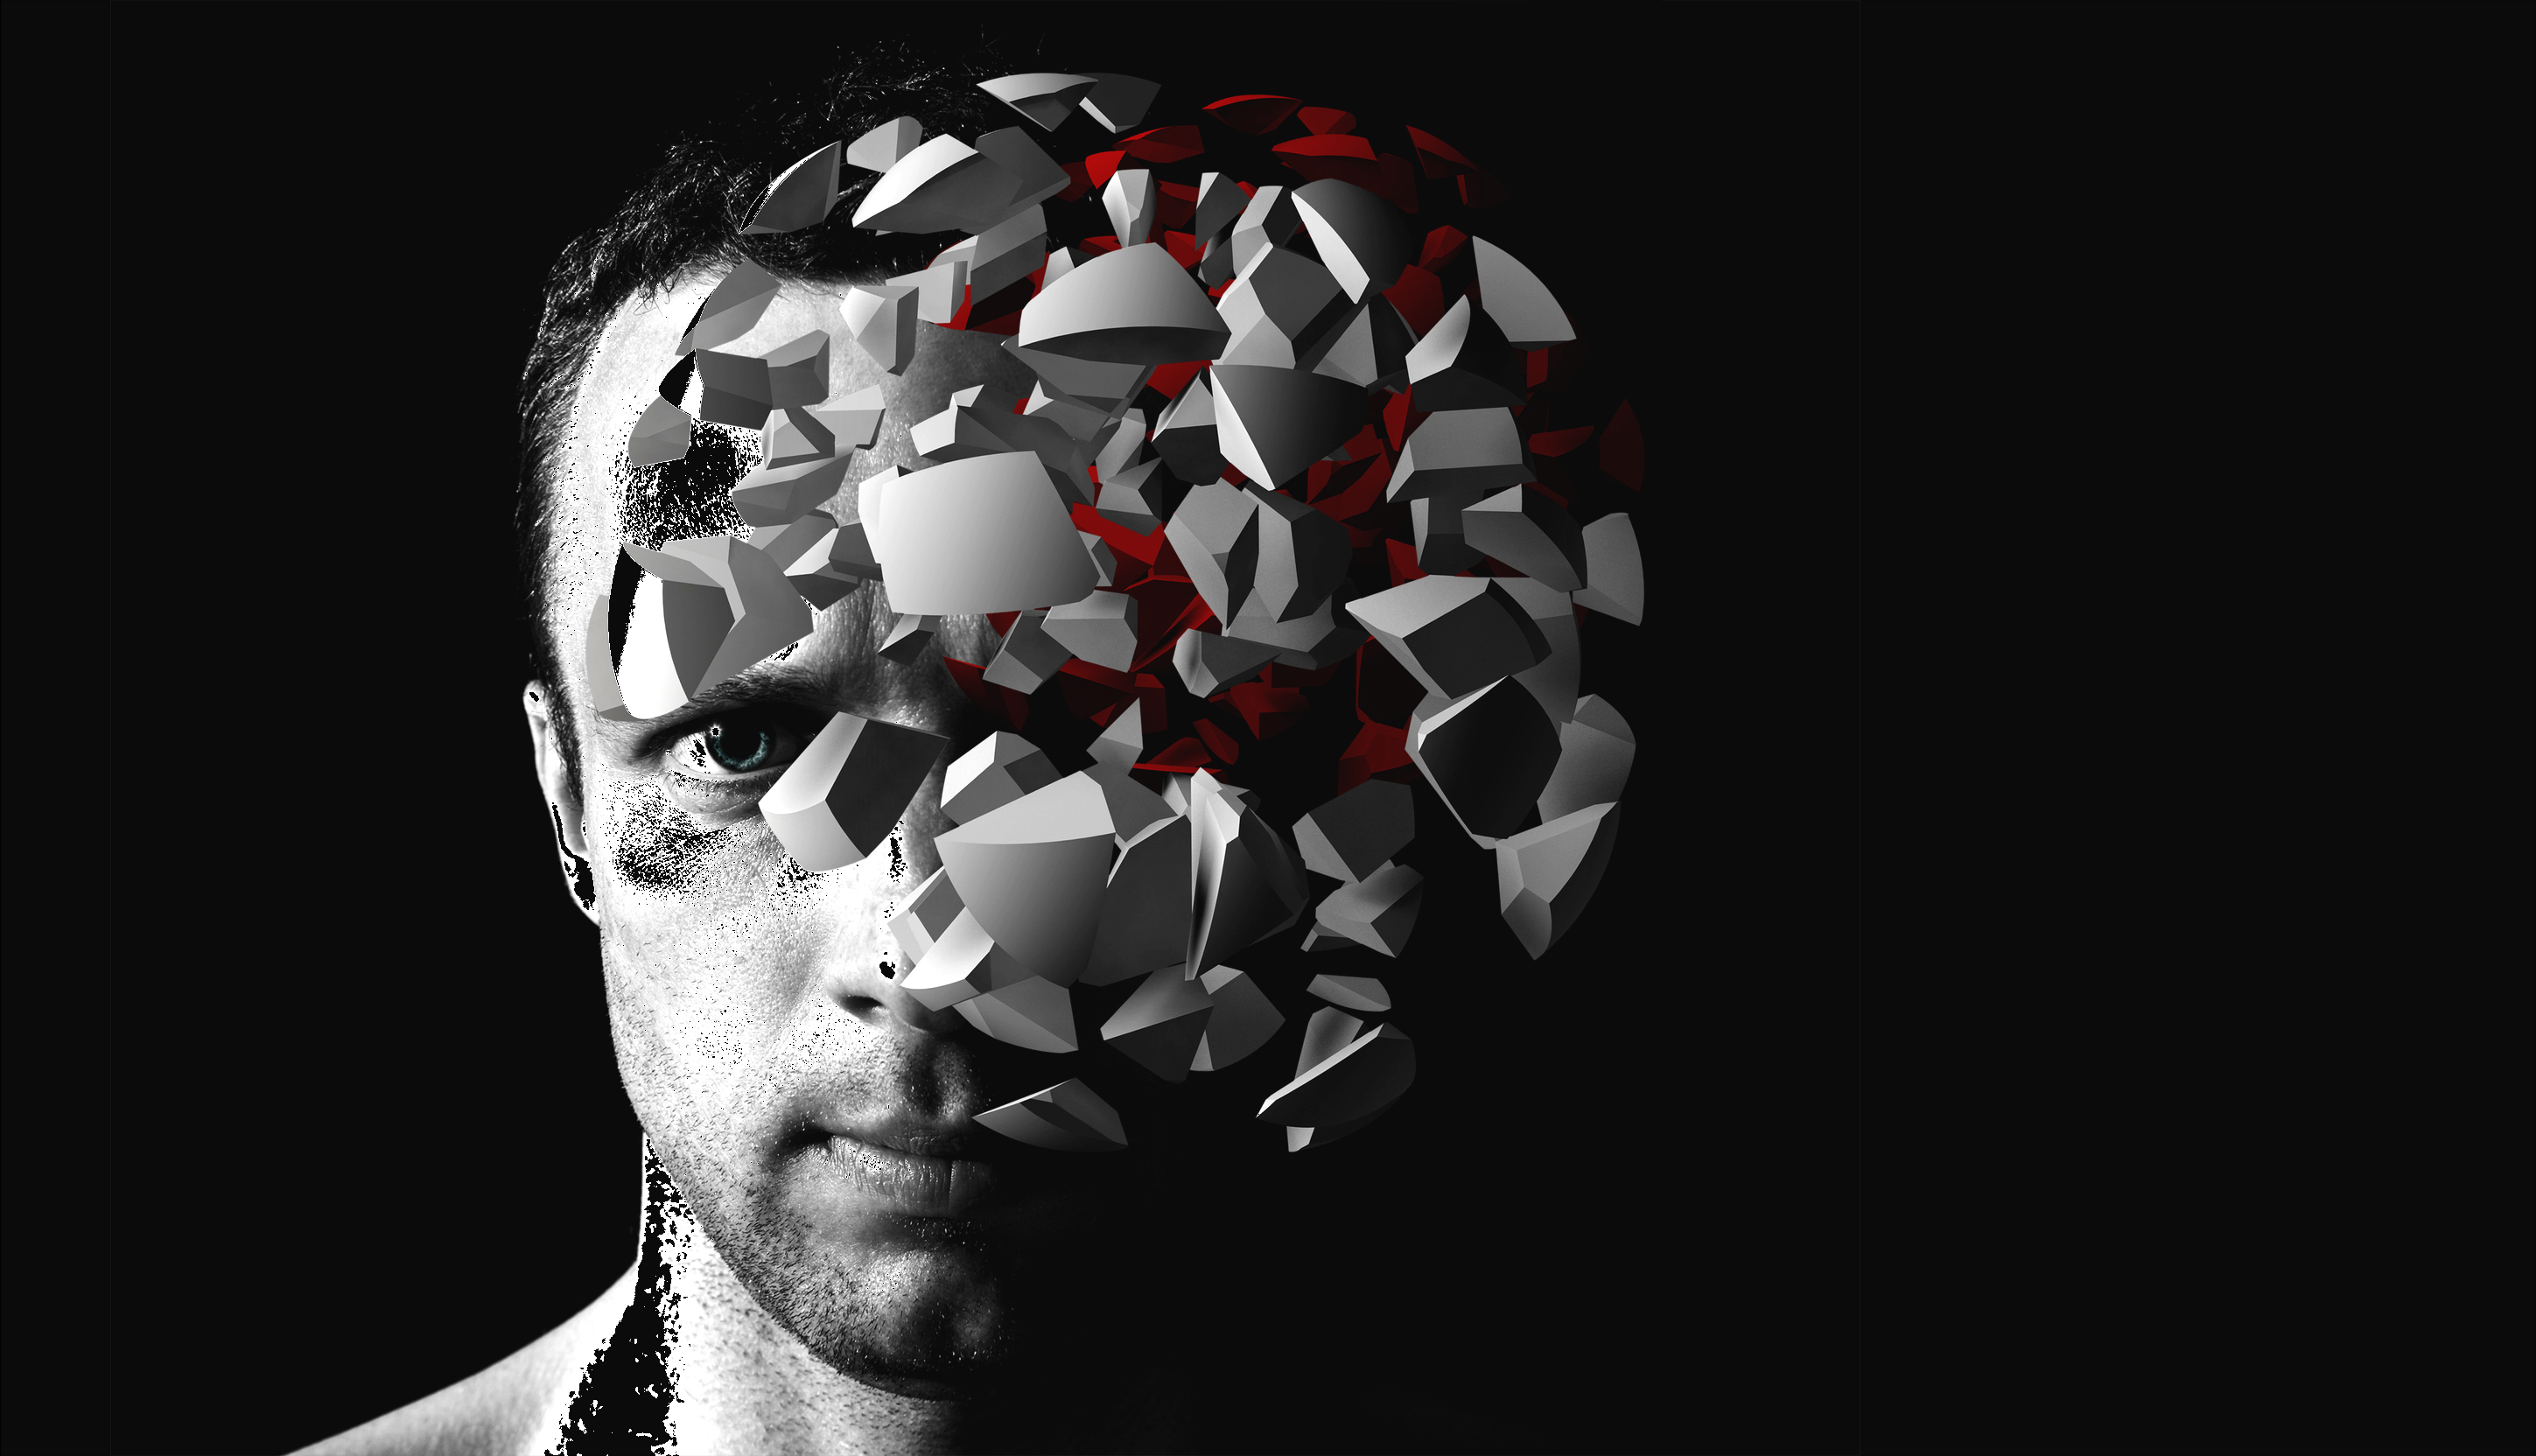 Caucasian man creative portrait with 3d explosion fragments on black background